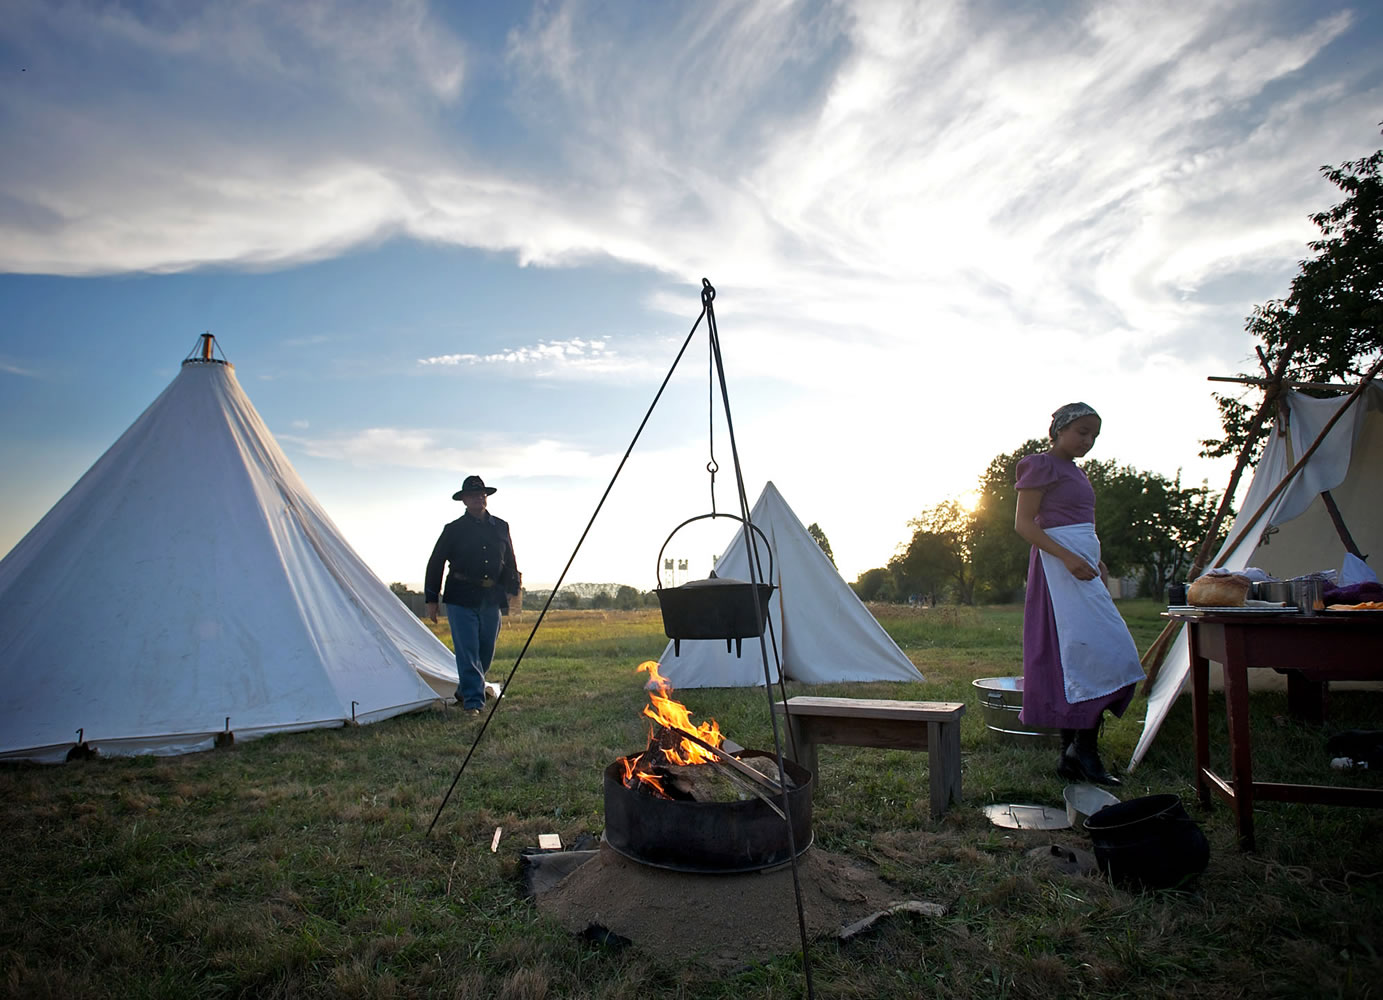 Ret. U.S. Army Col. Dale Lazo, 57, and  Lydia Sheehey, 25,  demonstrate life at Fort Vancouver for a U.S. Army soldier and a worker in the Laundress Camp in the 1890s.